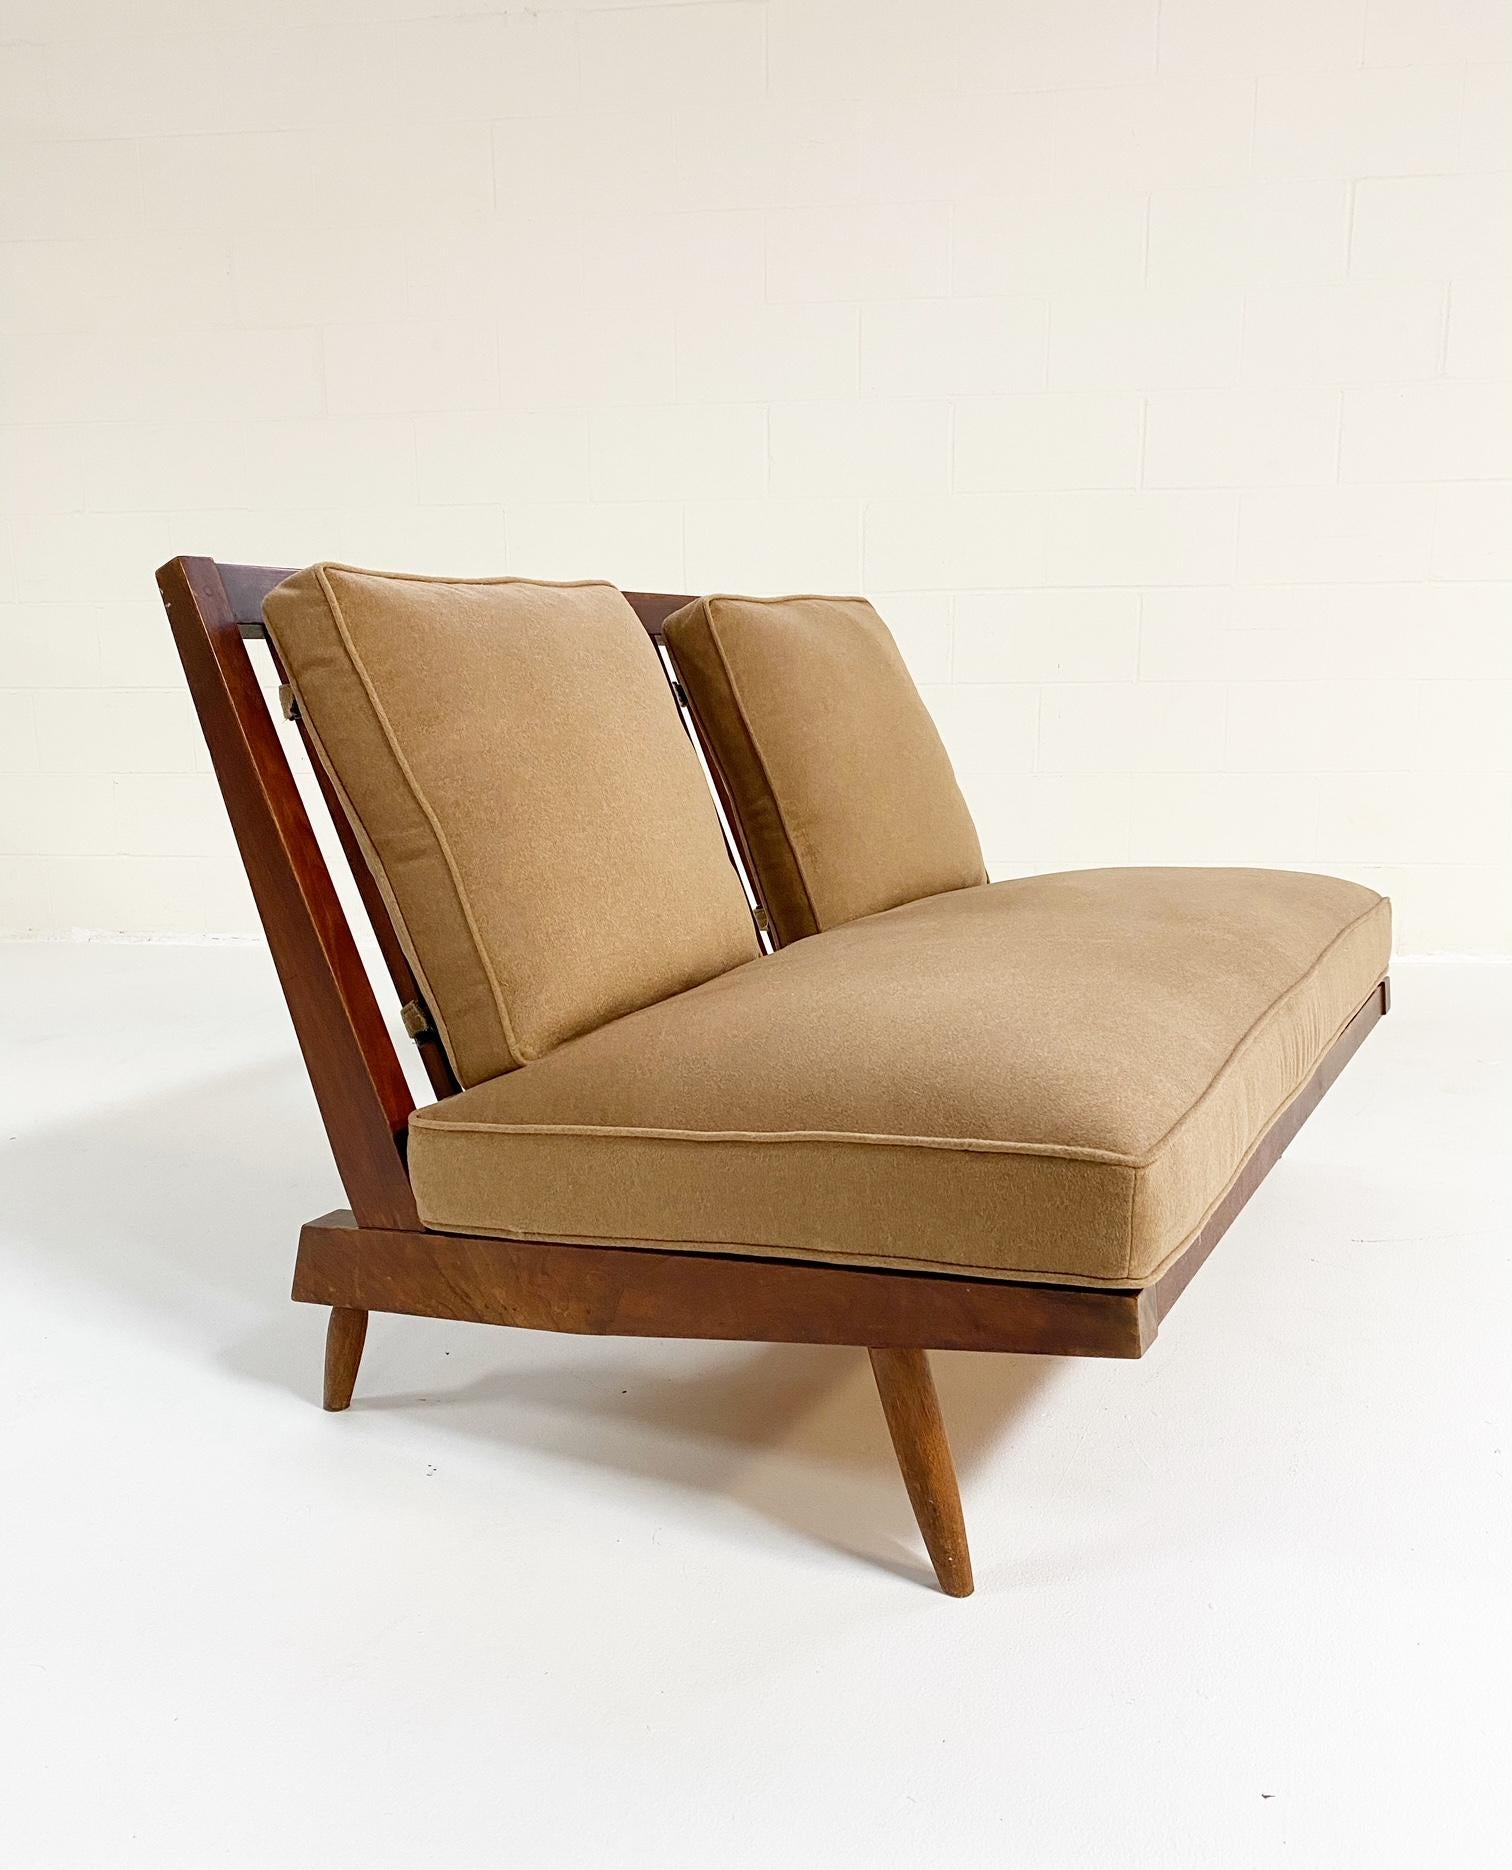 Nakashima's settee is a design lover's dream. Simple wood craftmanship at its finest. For the cushions, we chose an ultra-luxurious Loro Piana cashmere in a super chic camel hue, a perfect complement to the black walnut. From Loro Piana, 